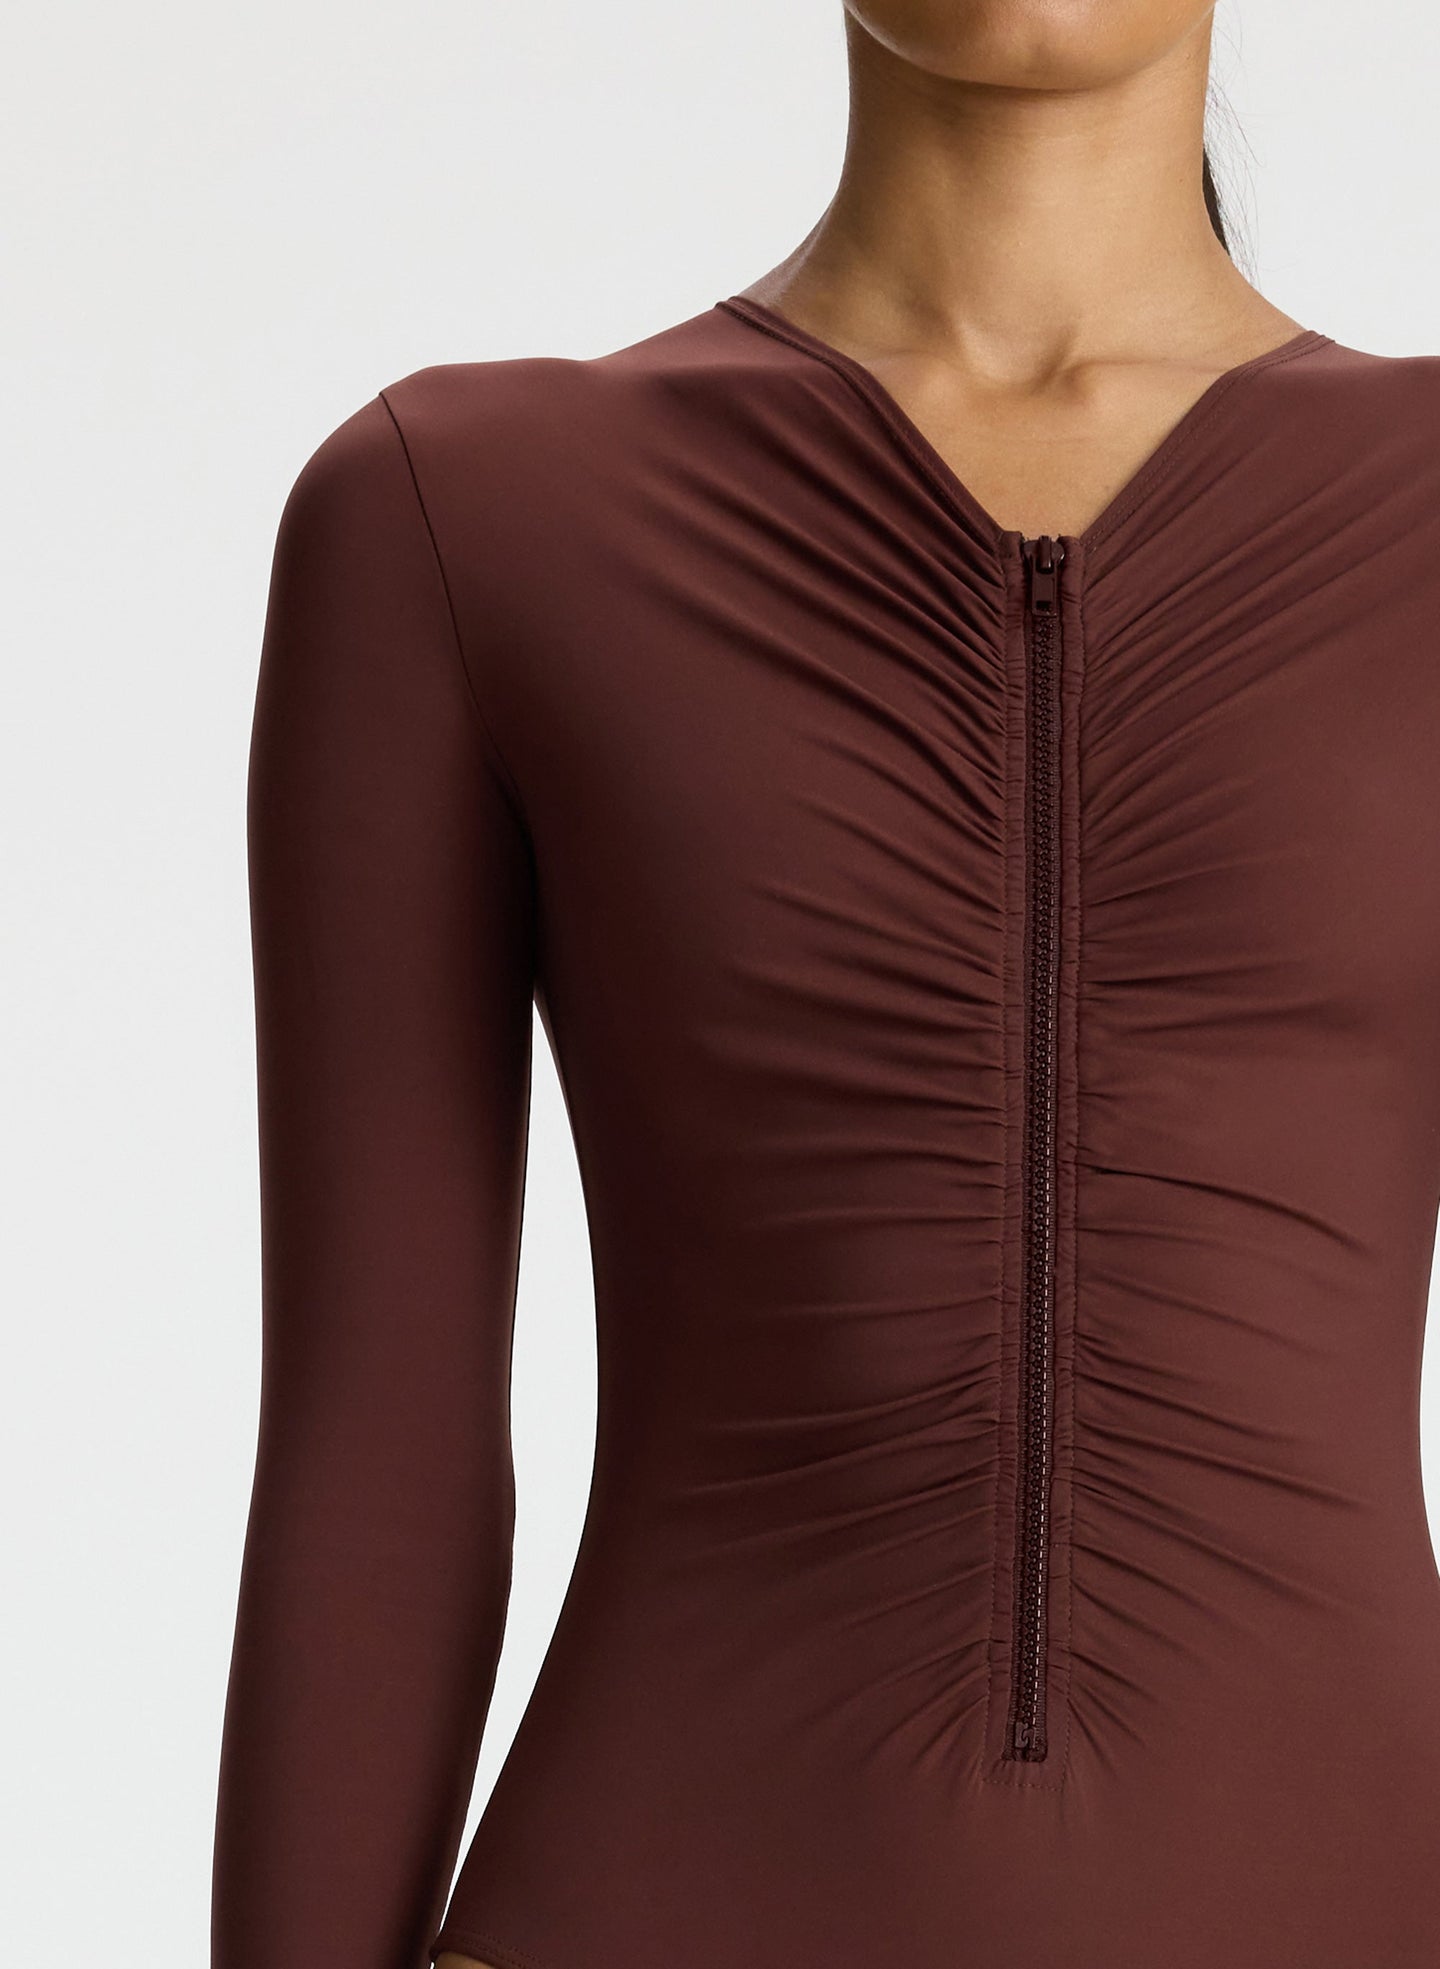 detail view of woman wearing brown long sleeve zip front swimsuit